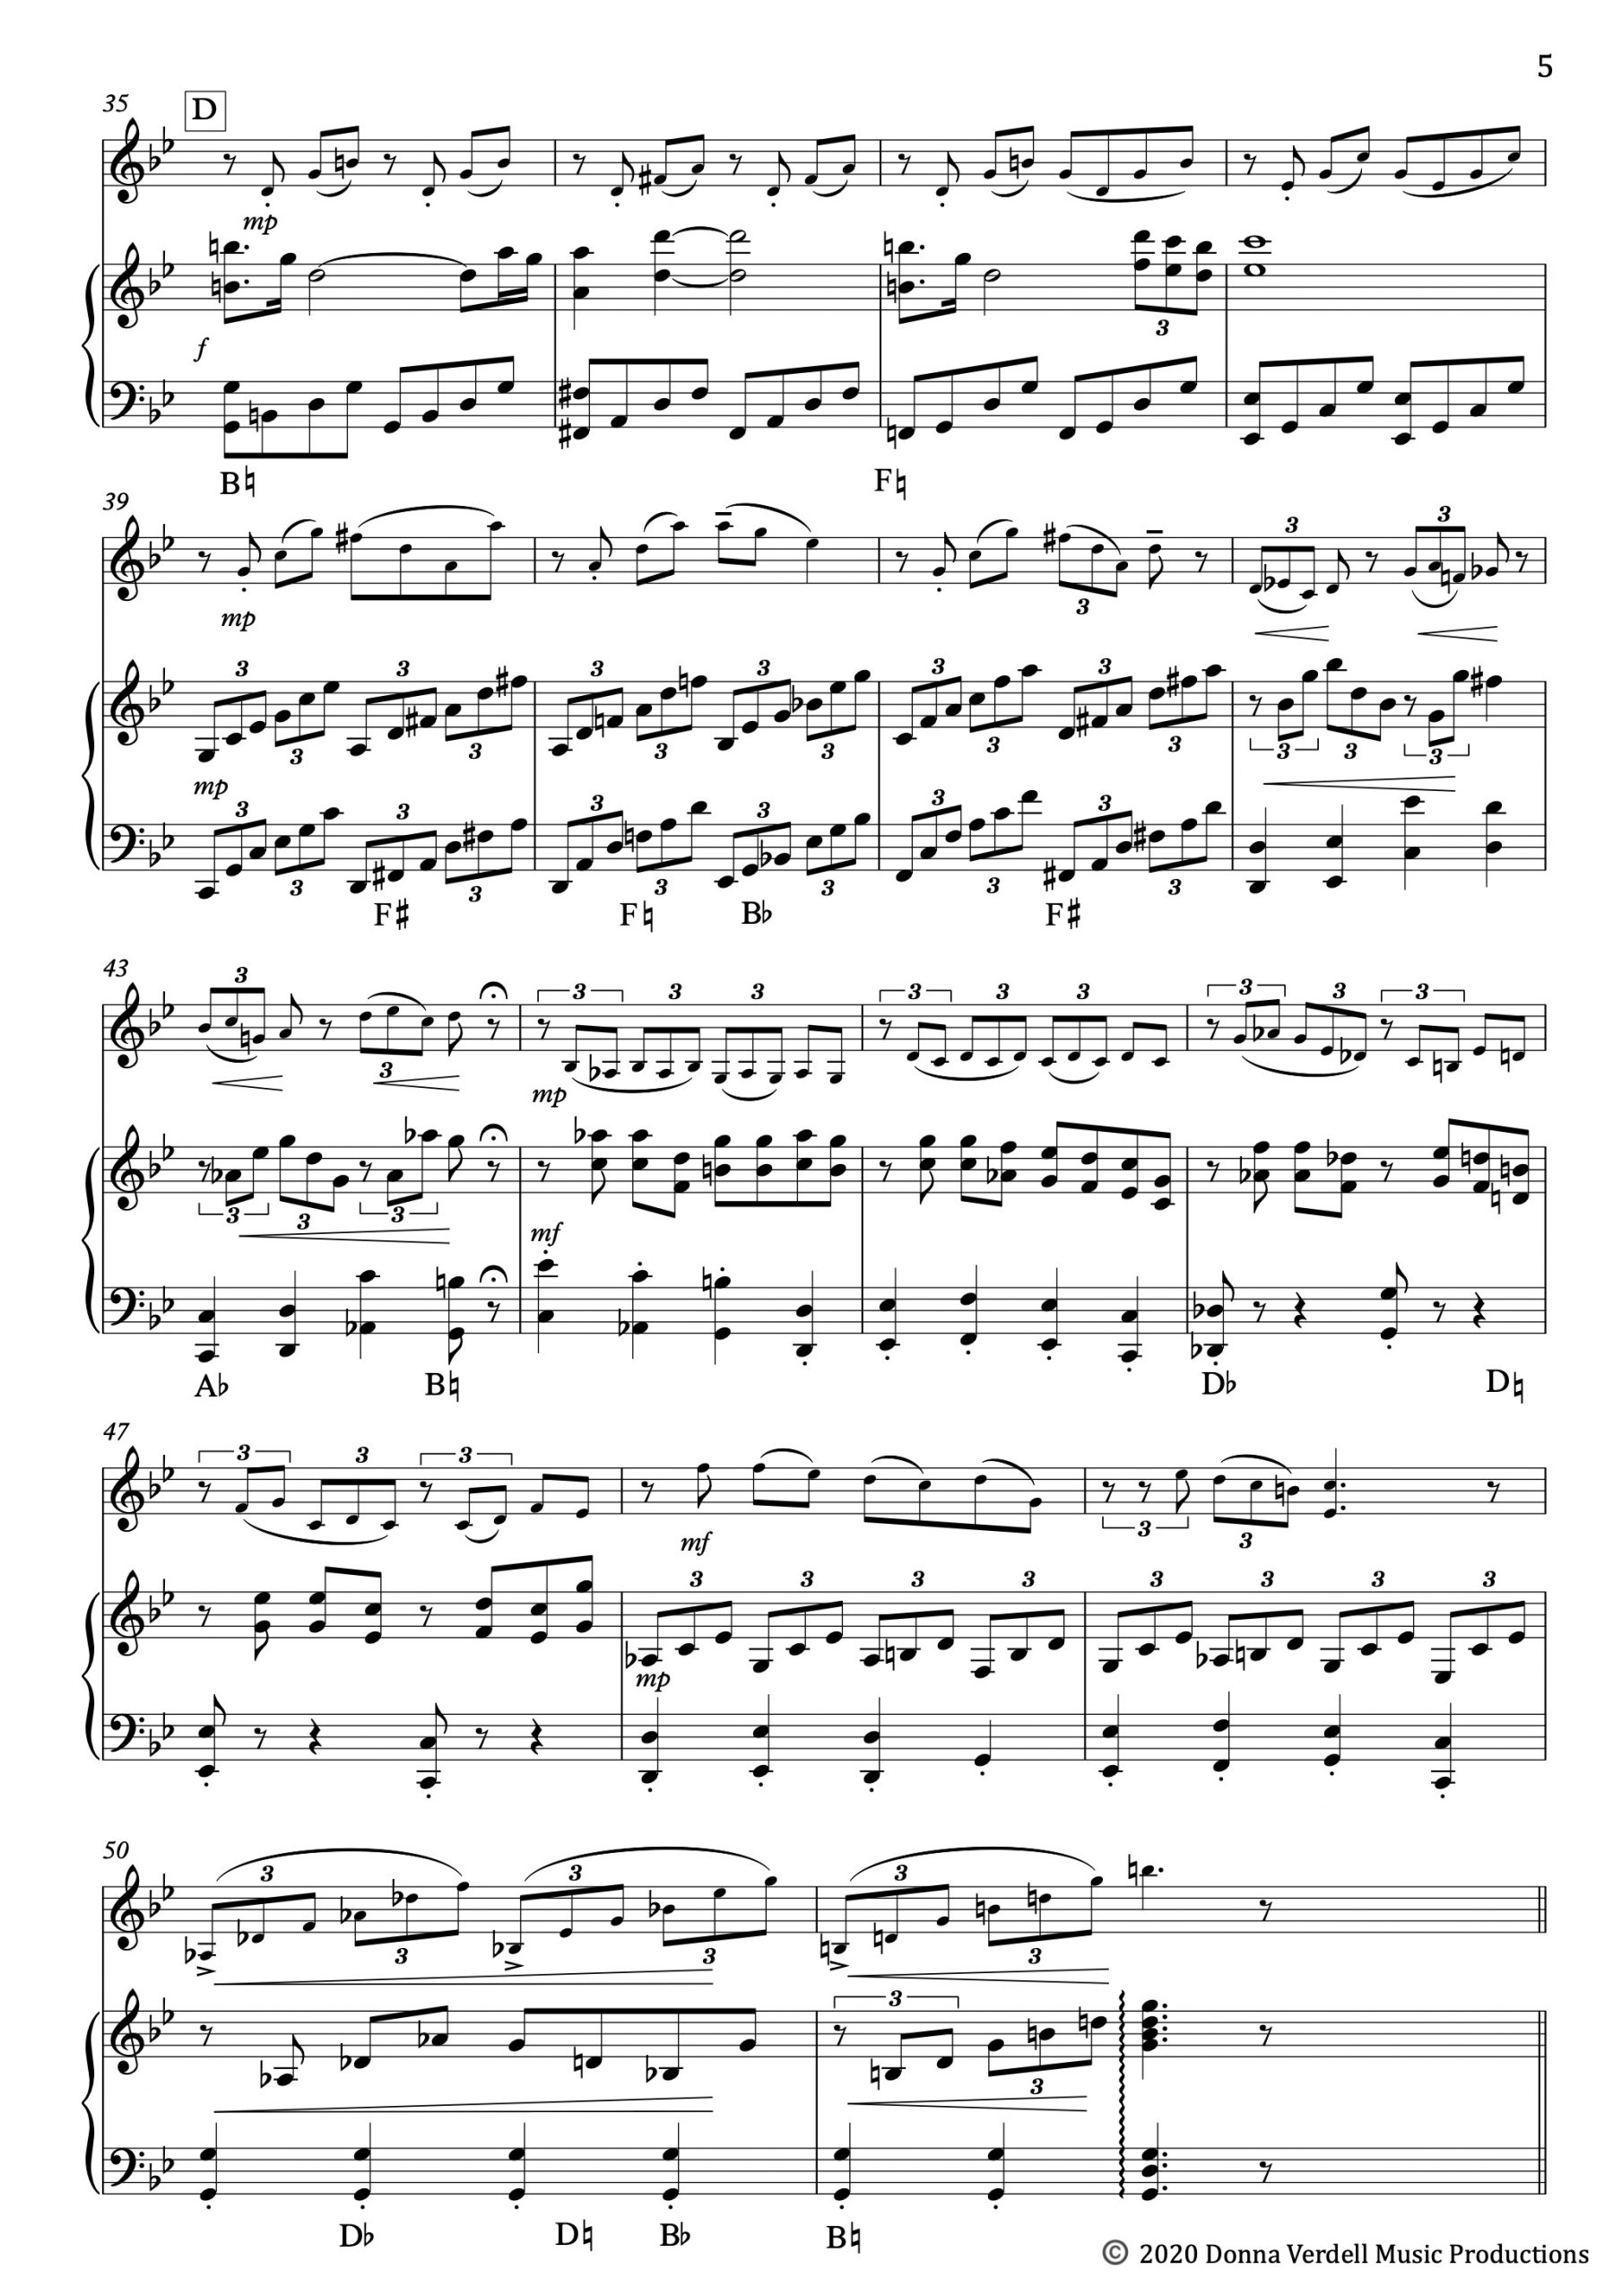 Song for Viola and Harp in b-flat (Summer's End) PAGINA 5 - Donna Verdell